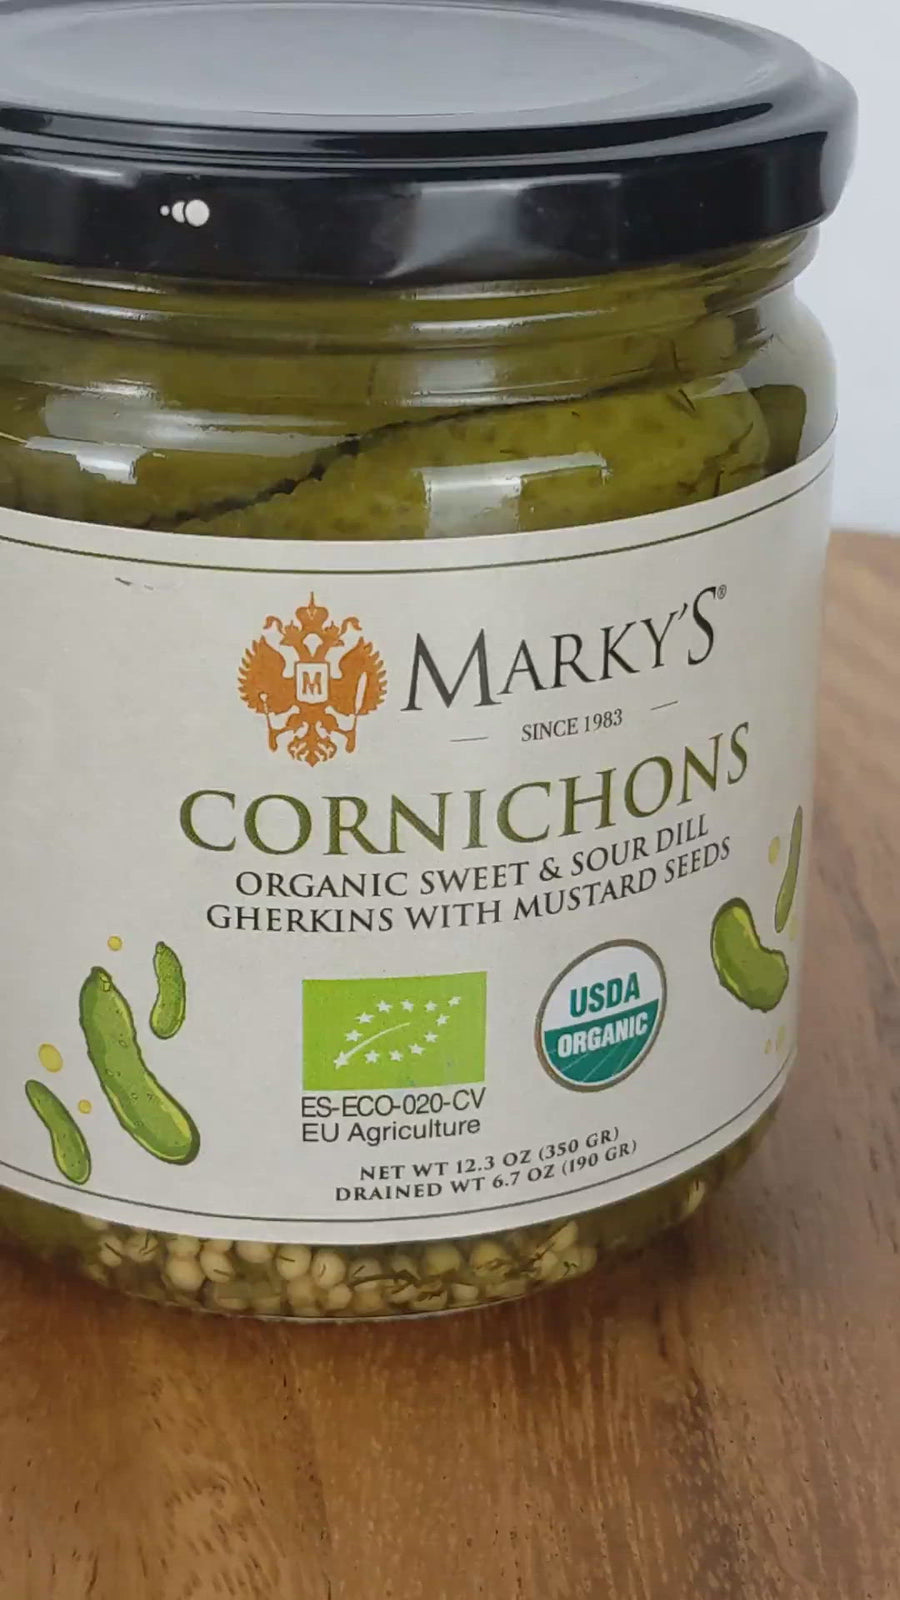 Sweet-and-Sour-Dill-Gherkins-With-Mustard-Seeds-video.mp4